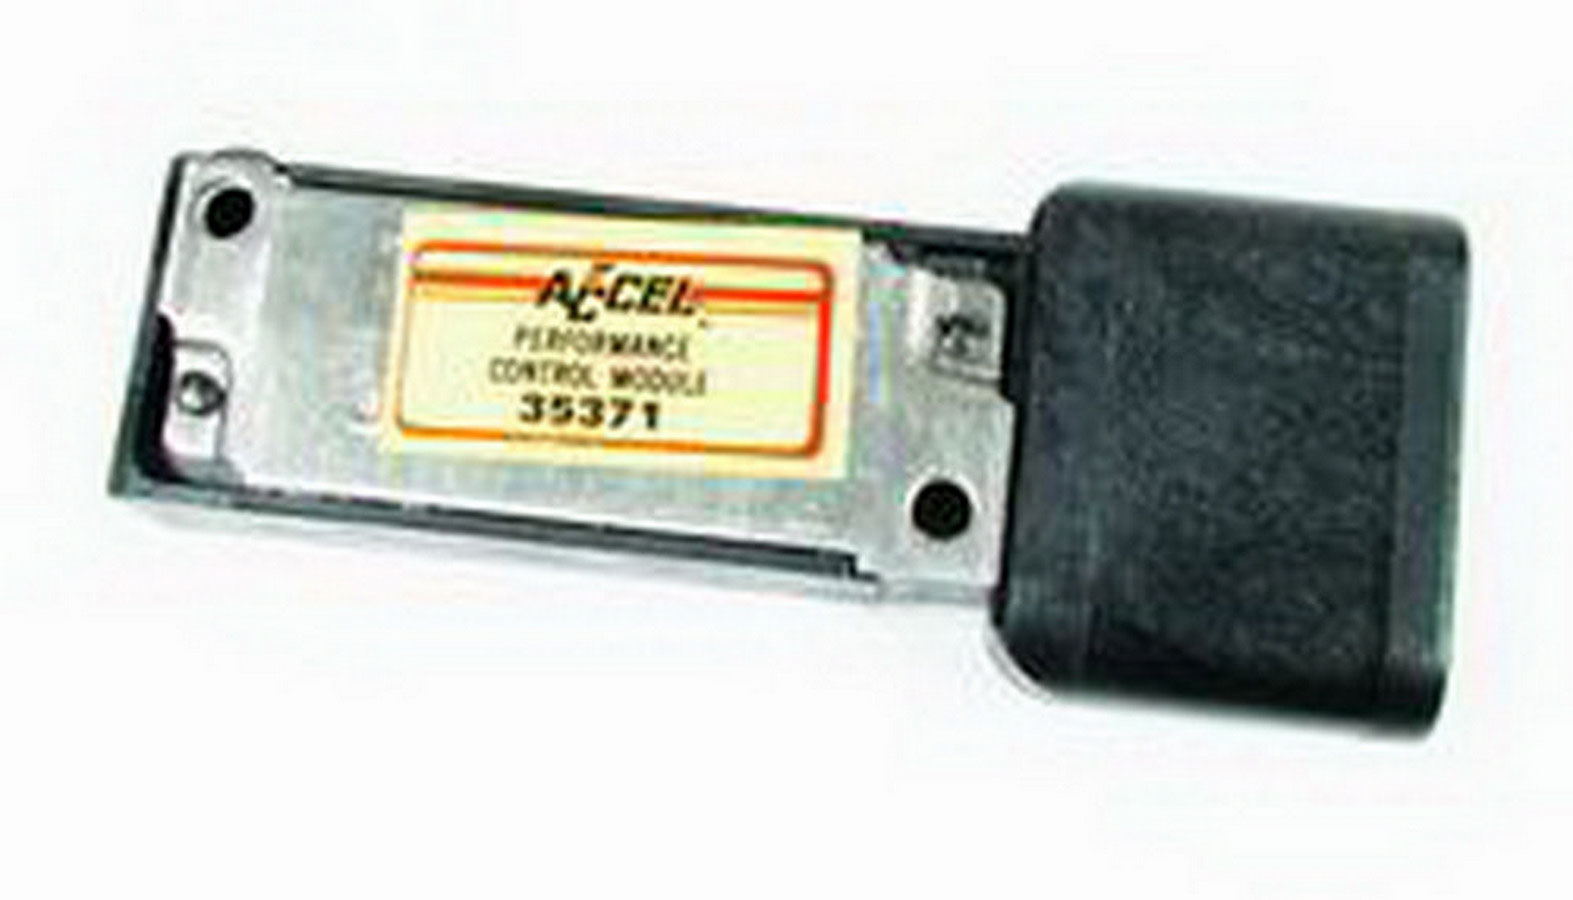 ACL-35371 #1